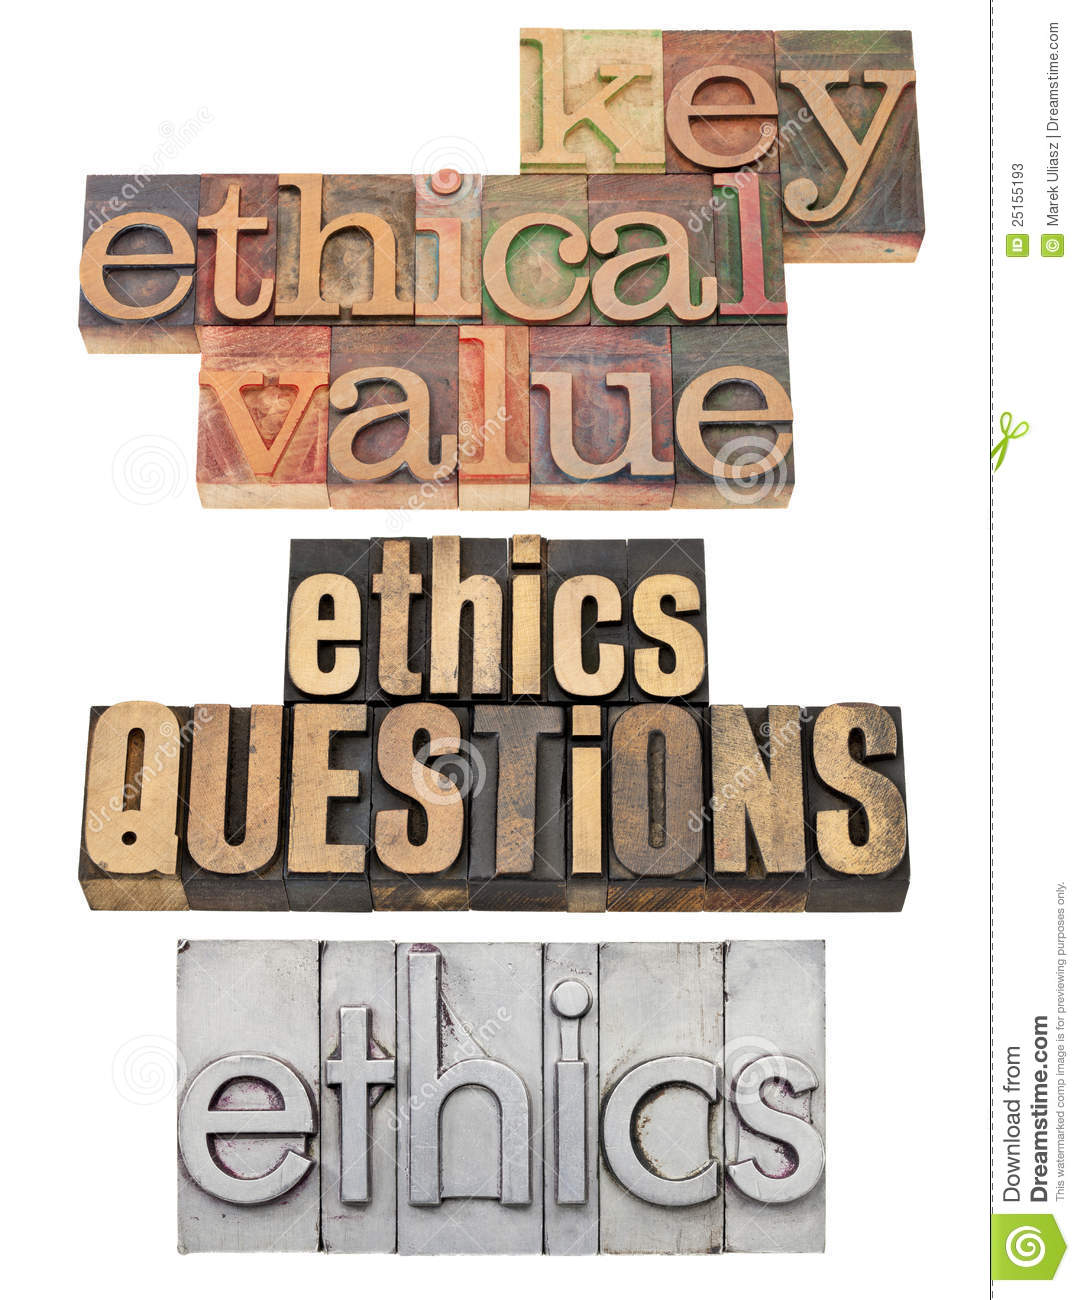 Key Ethical Value And Ethics Questions   Moral Dilemma Concept   A